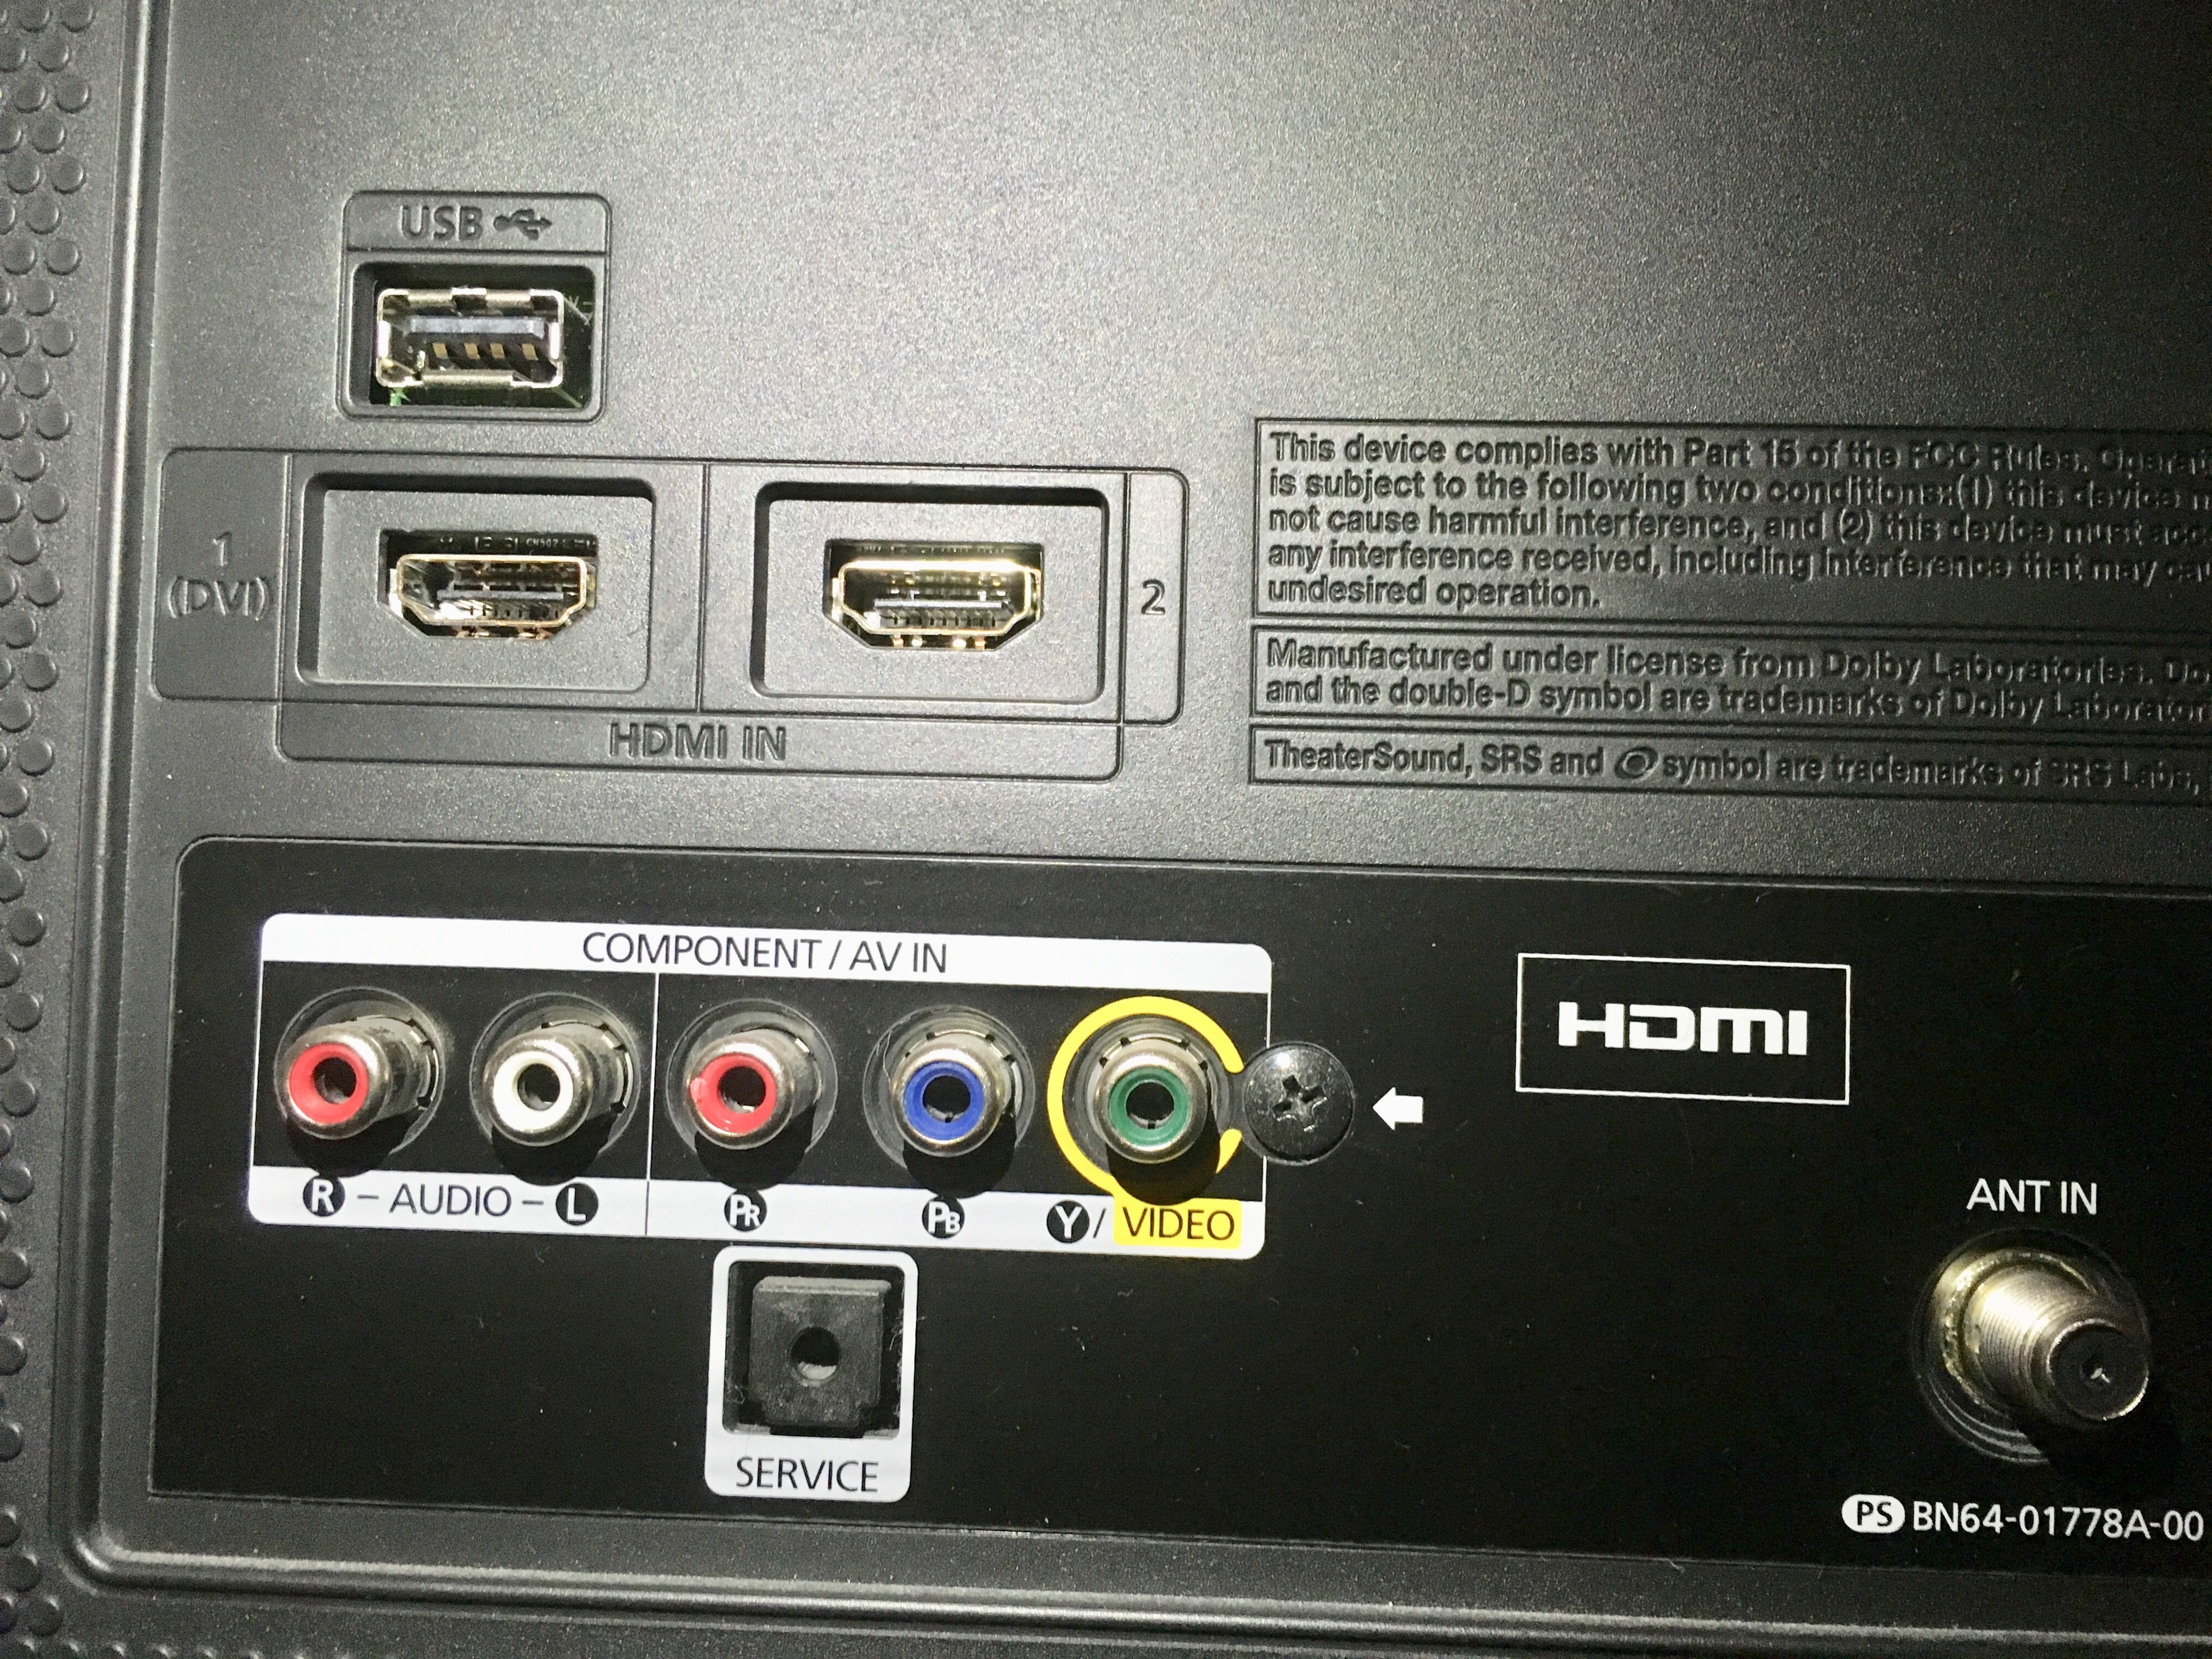 Setting up on a TV no HDMI ARC or optical | Sonos Community